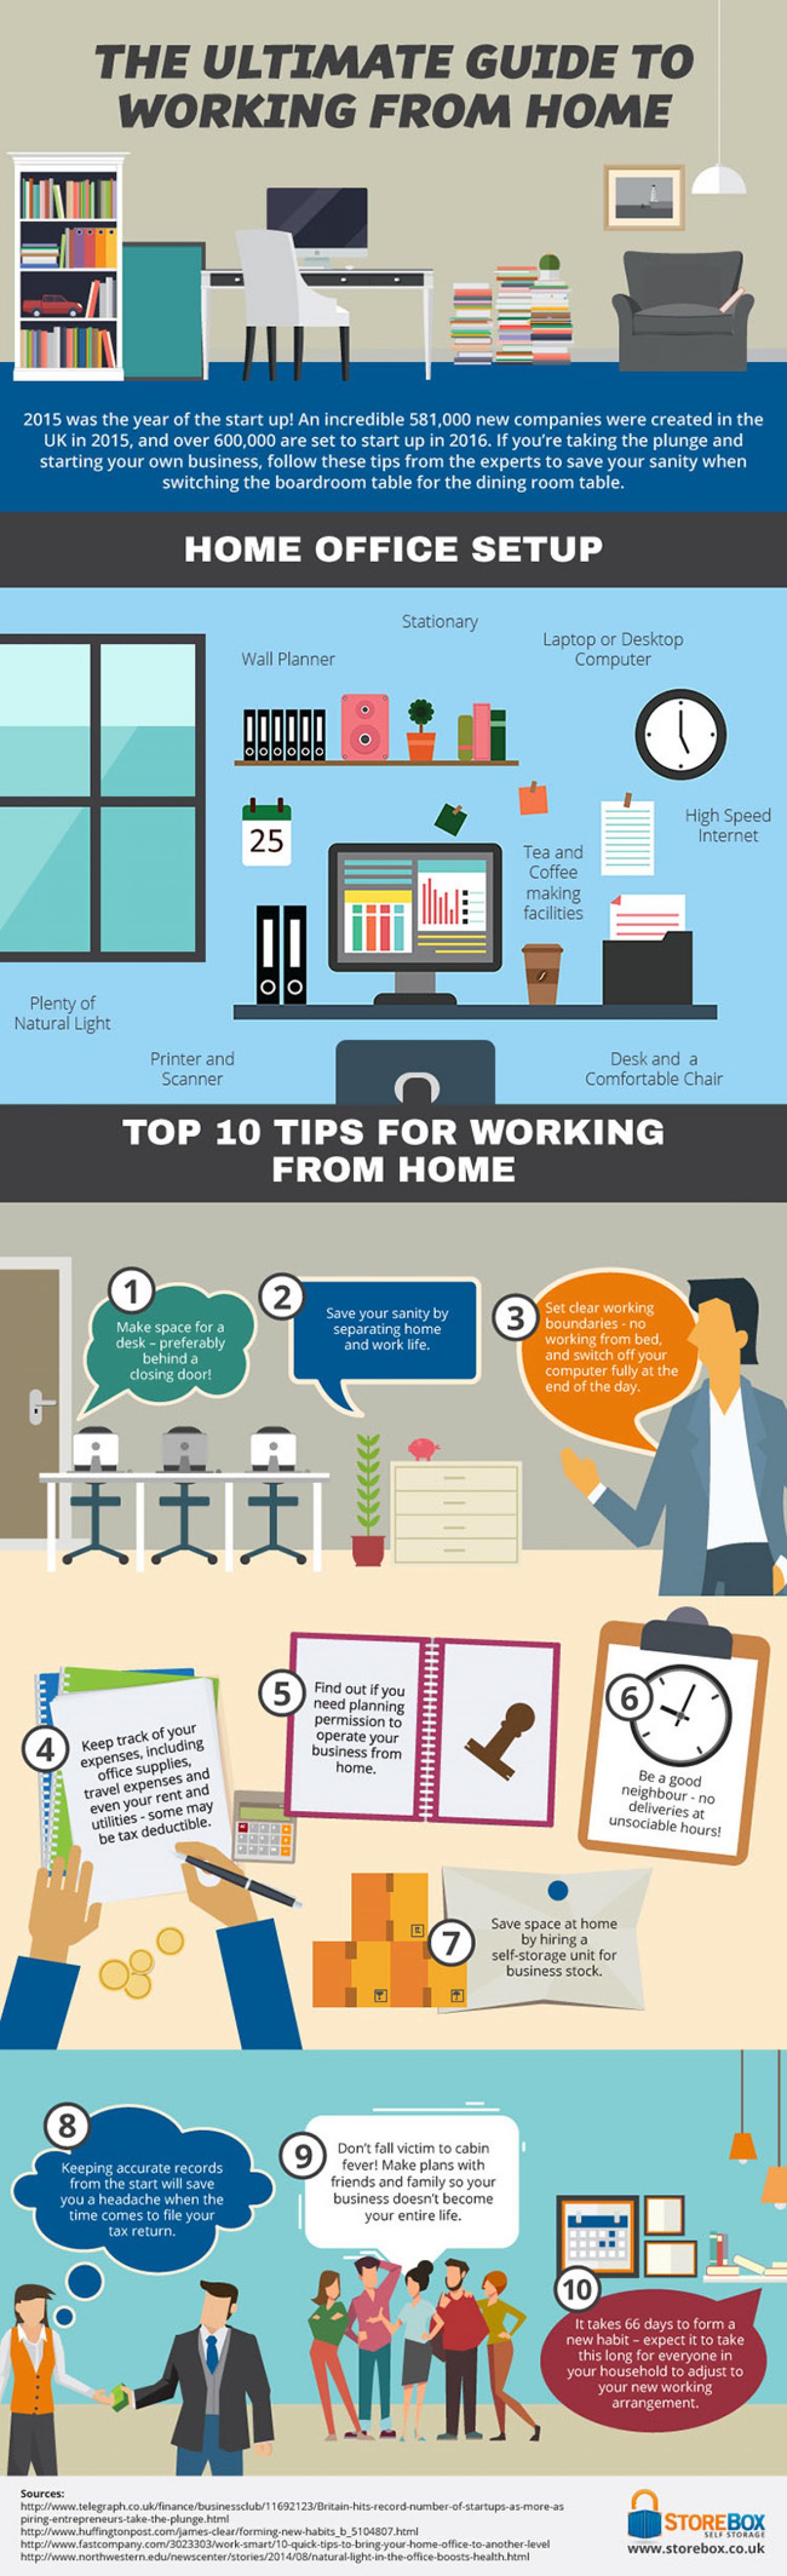 The ultimate guide to working from home